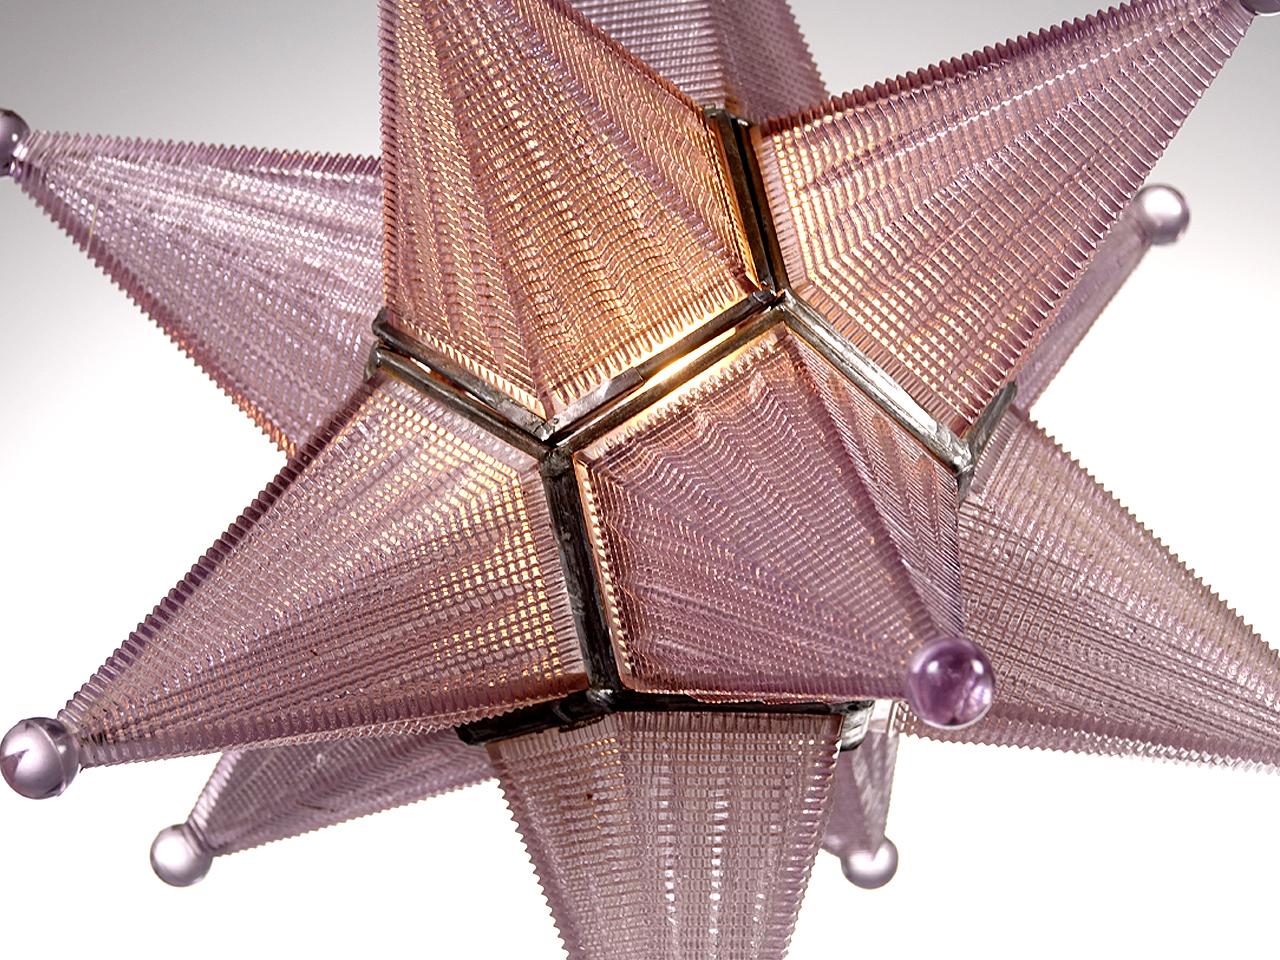 We have never come across a star lamp of this quality. Each star section is cast prismatic glass. The glass also has a lavender cast to it. The tint happens over years of use and is part of the patina and aging process for some types of glass. The